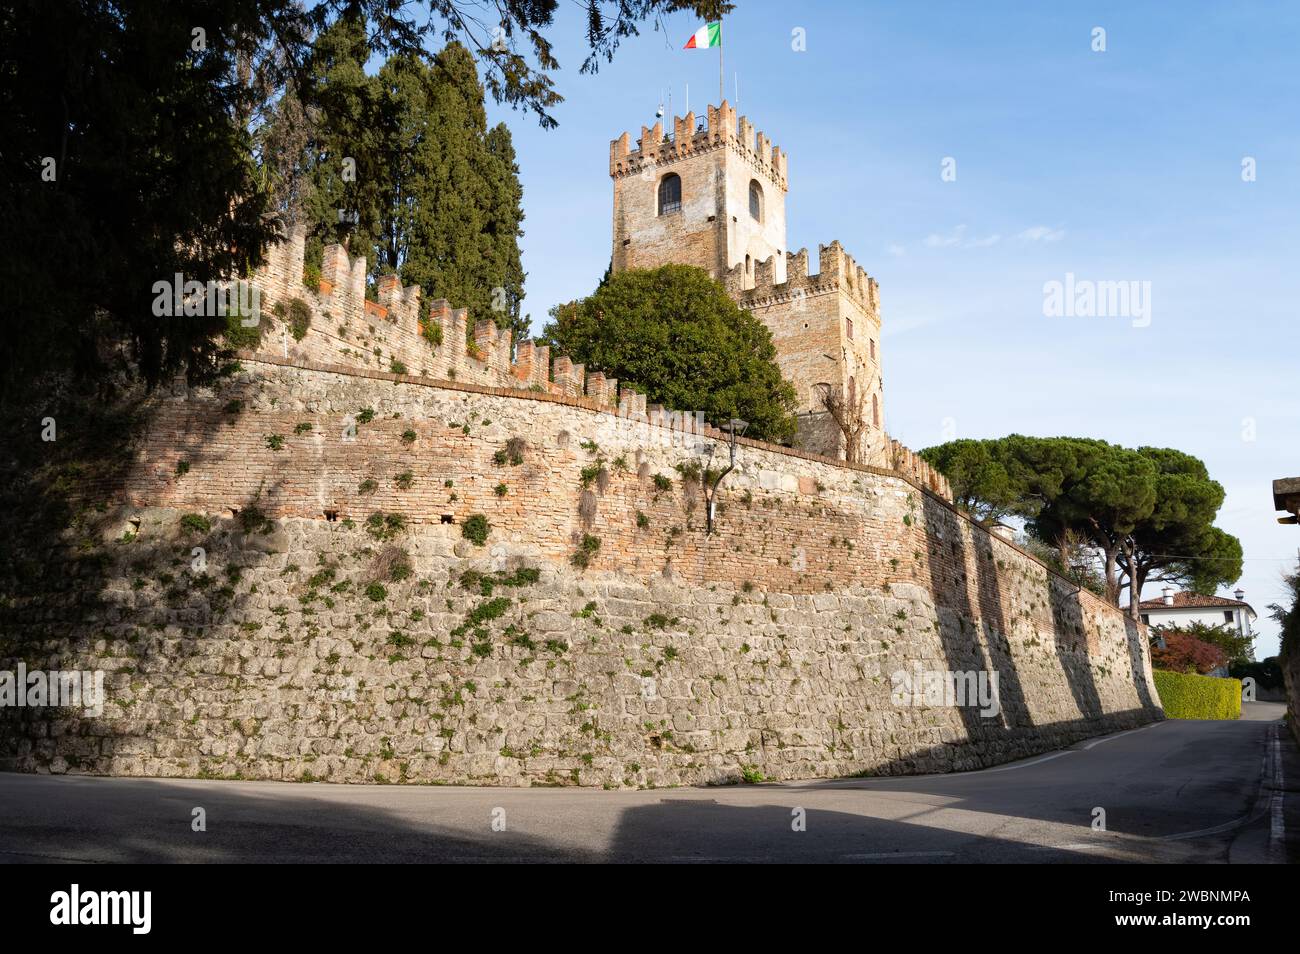 View of the medieval castle of Conegliano in northern Italy Stock Photo